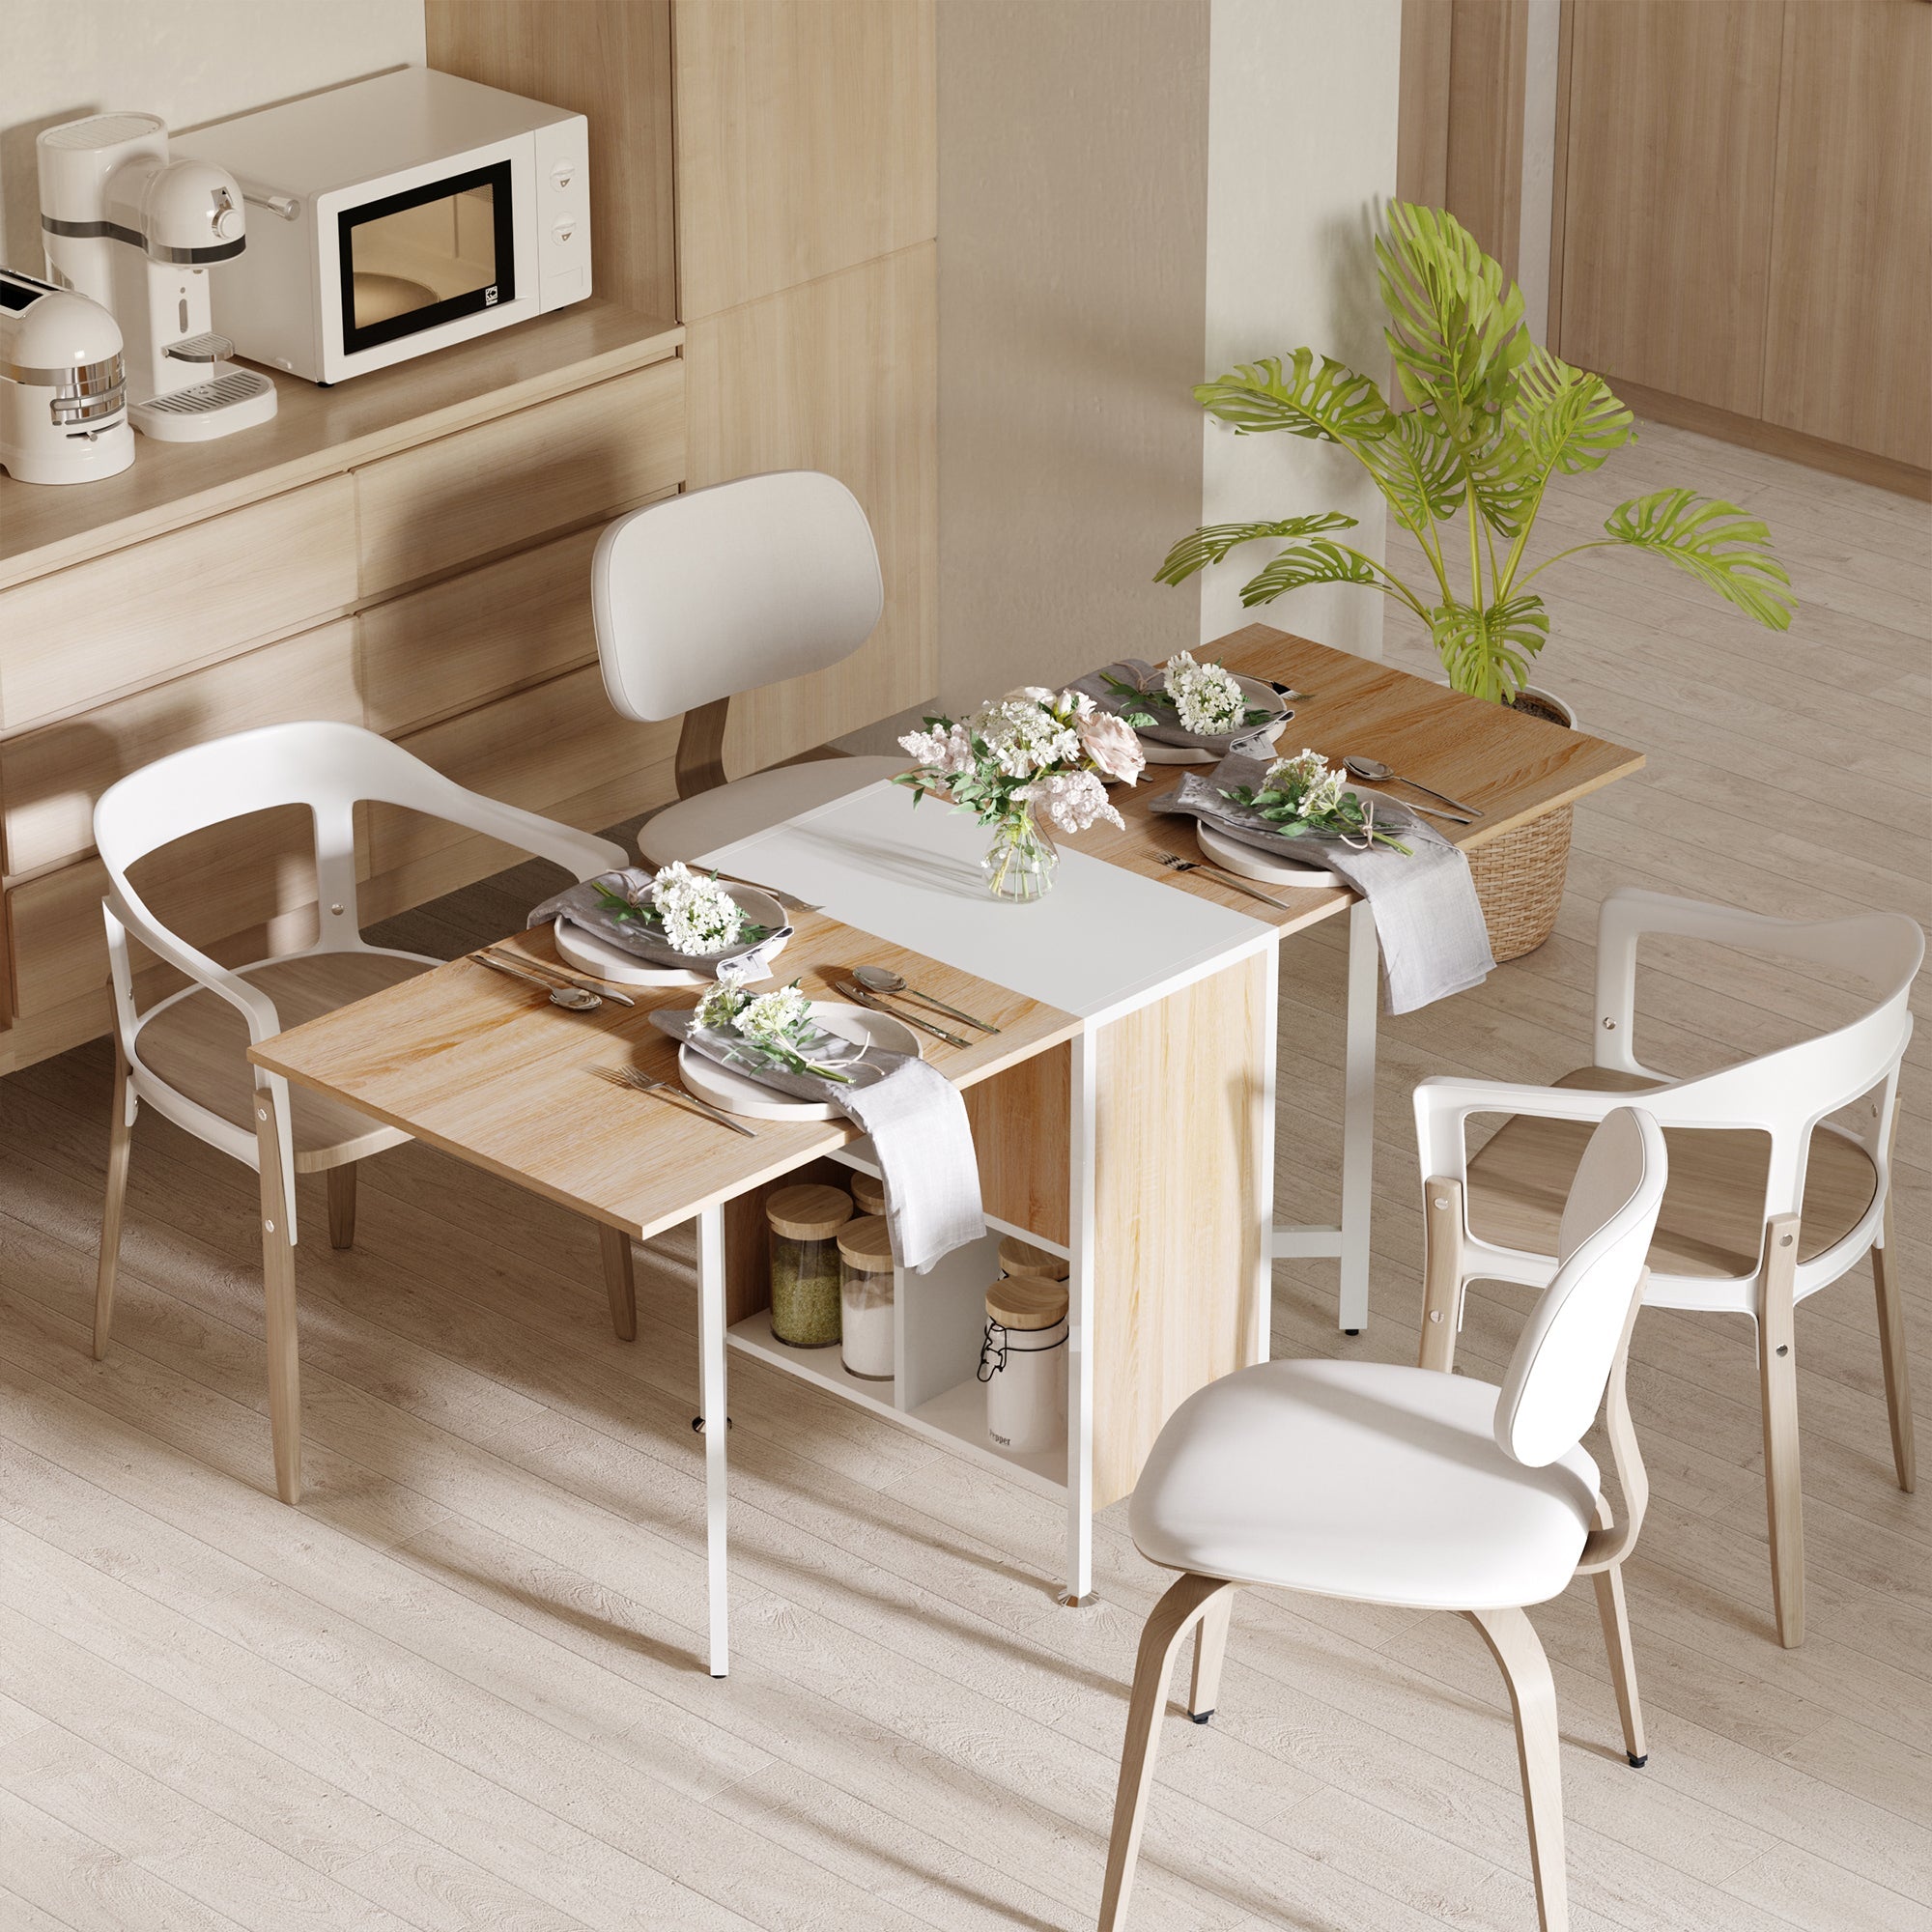 Foldable Dining Table Folding Workstation for Small Space with Storage Shelves Cubes Oak & White-0